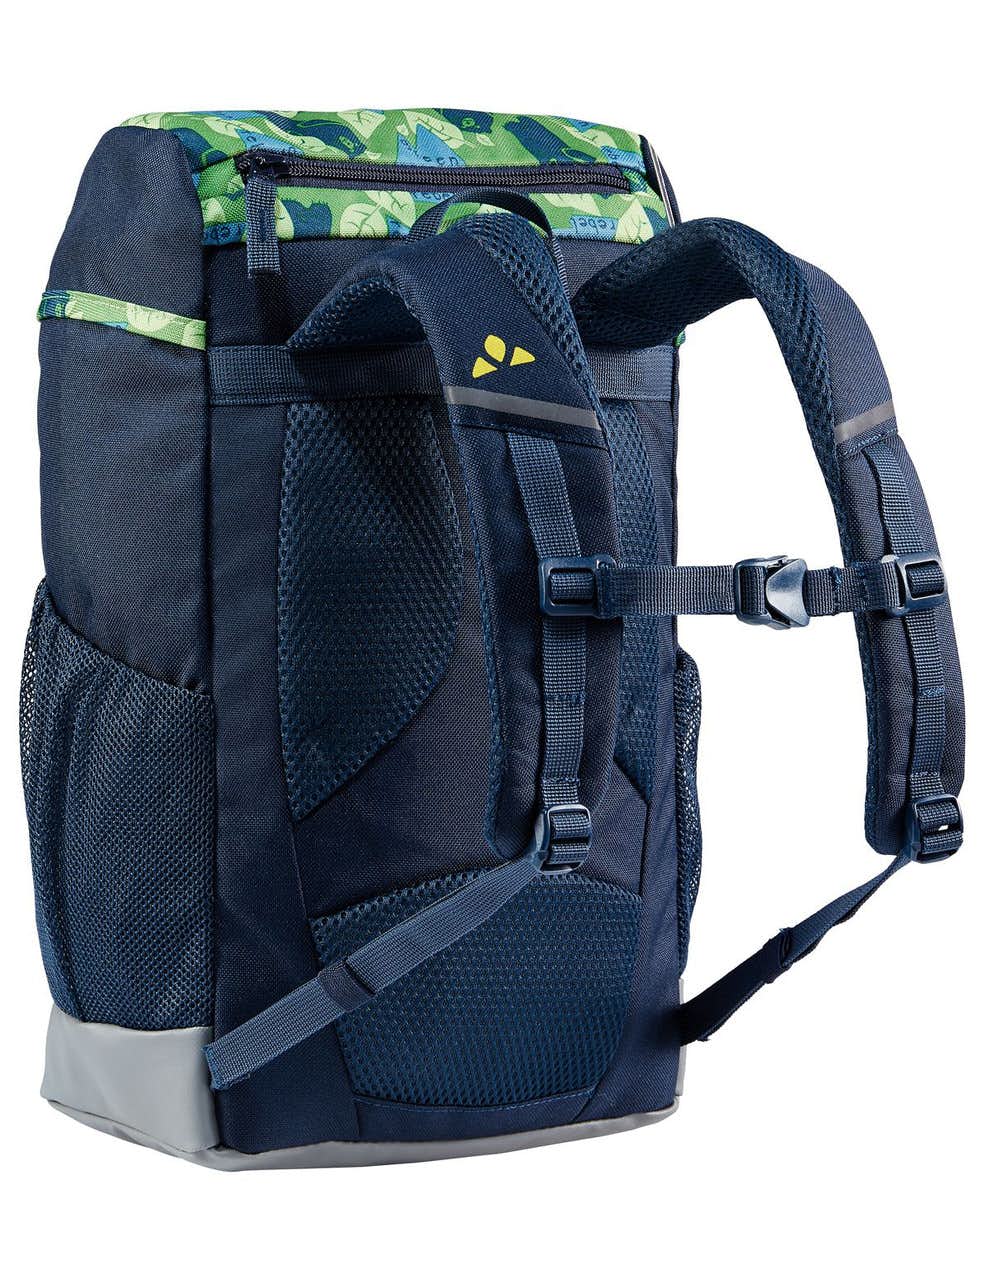 Puck 10L Backpack Parrot Green/Eclipse